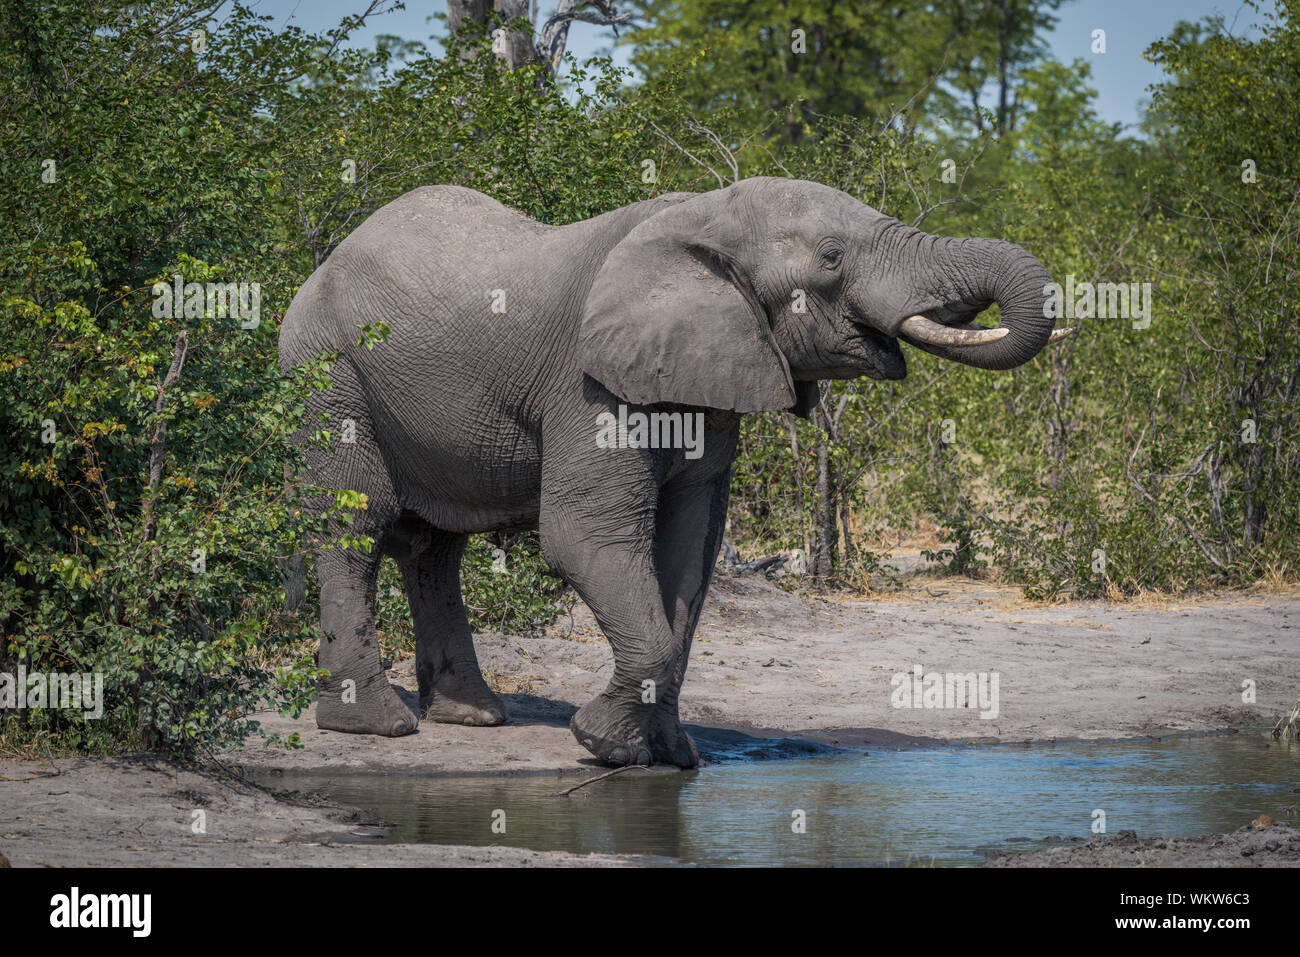 Elephant Drinking Water From Pond In Forest Stock Photo